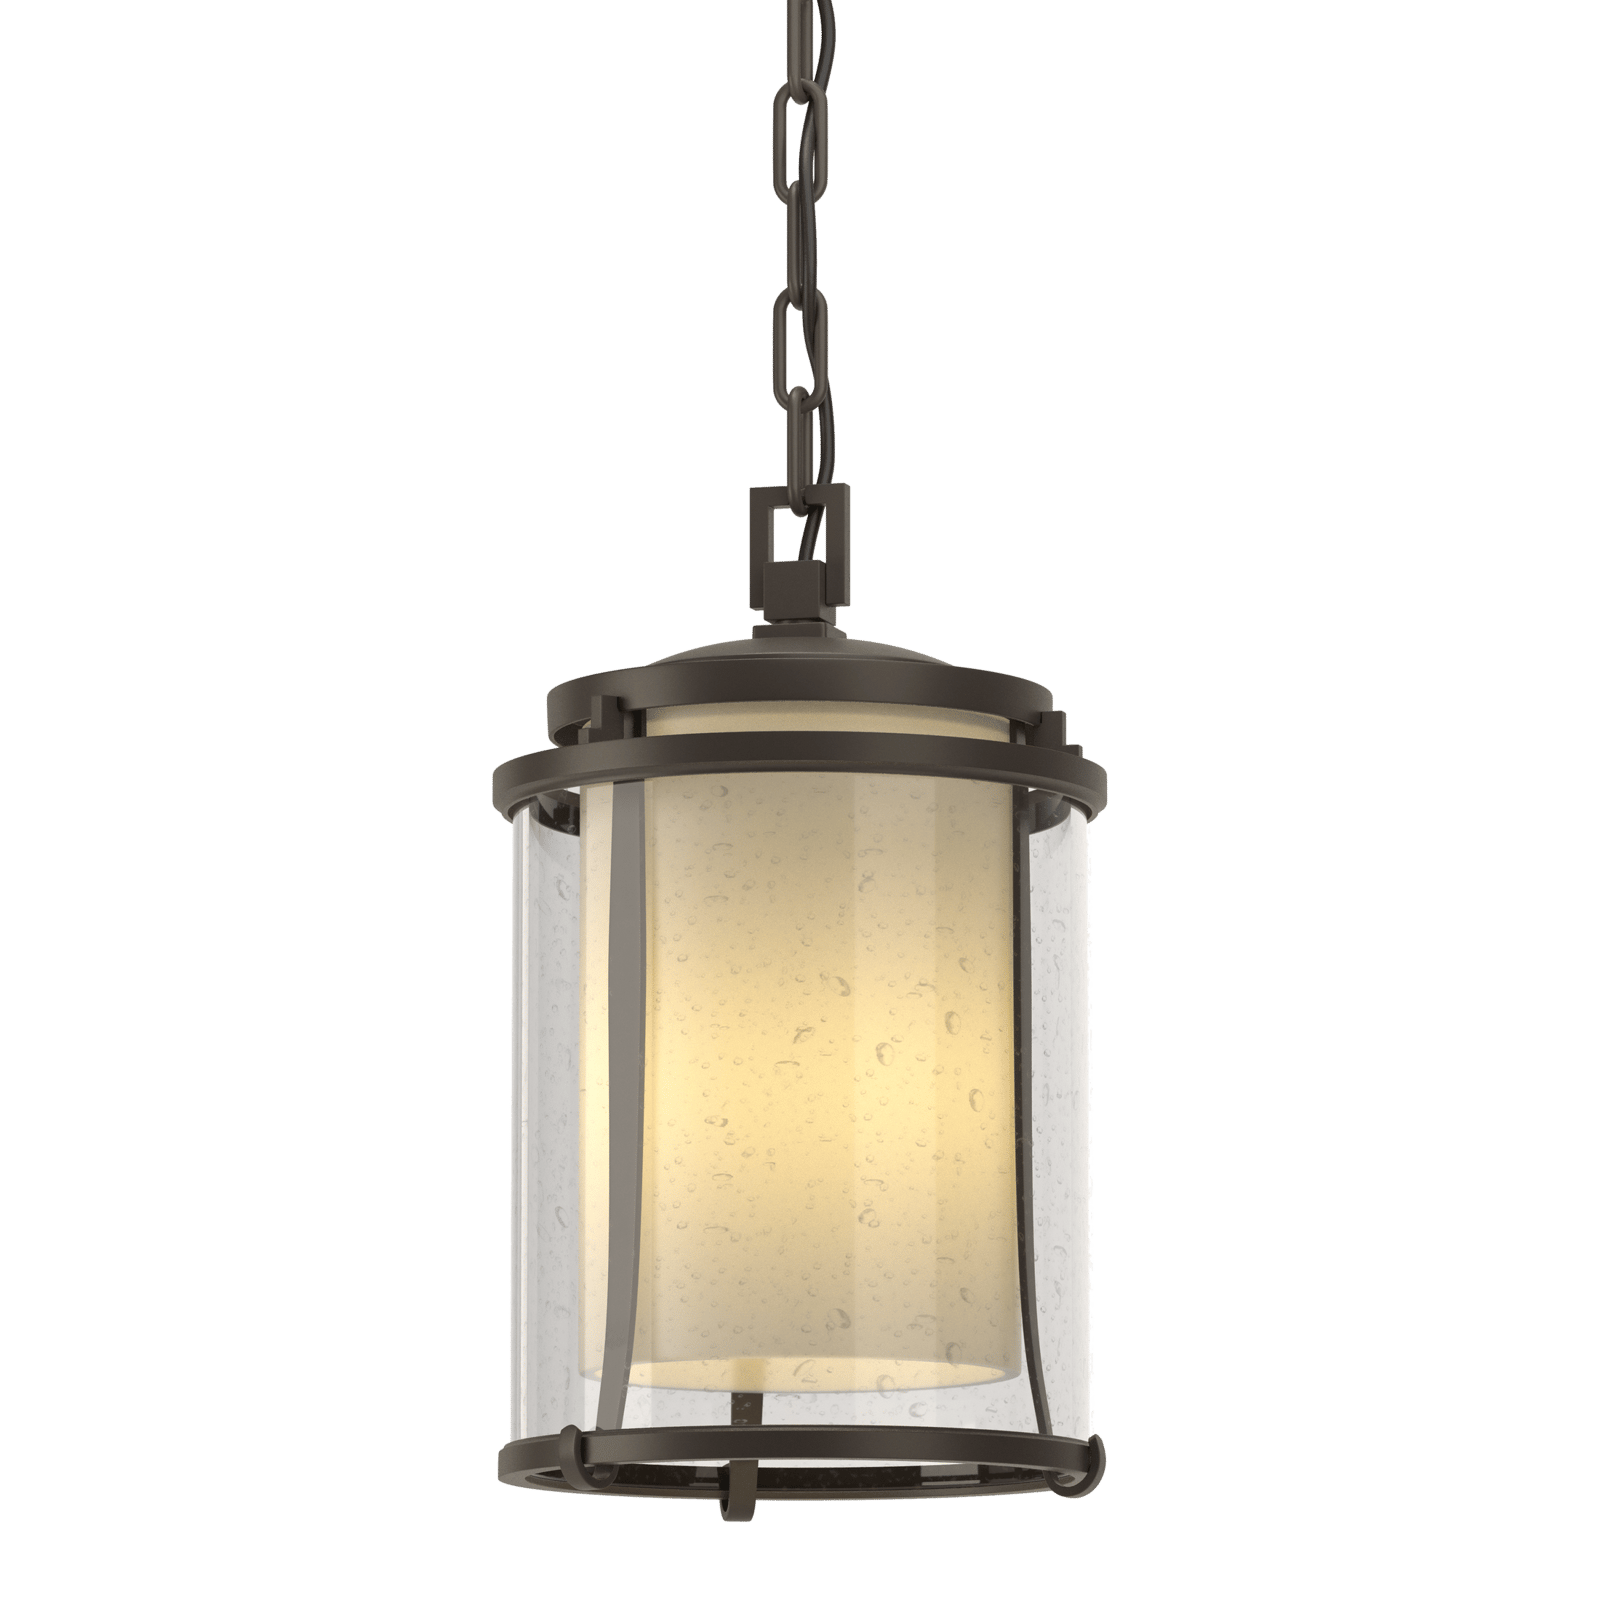 Hubbardton Forge Meridian Outdoor Ceiling Fixture Outdoor l Wall Hubbardton Forge Coastal Dark Smoke Seeded Glass with Opal Diffuser (ZS) 